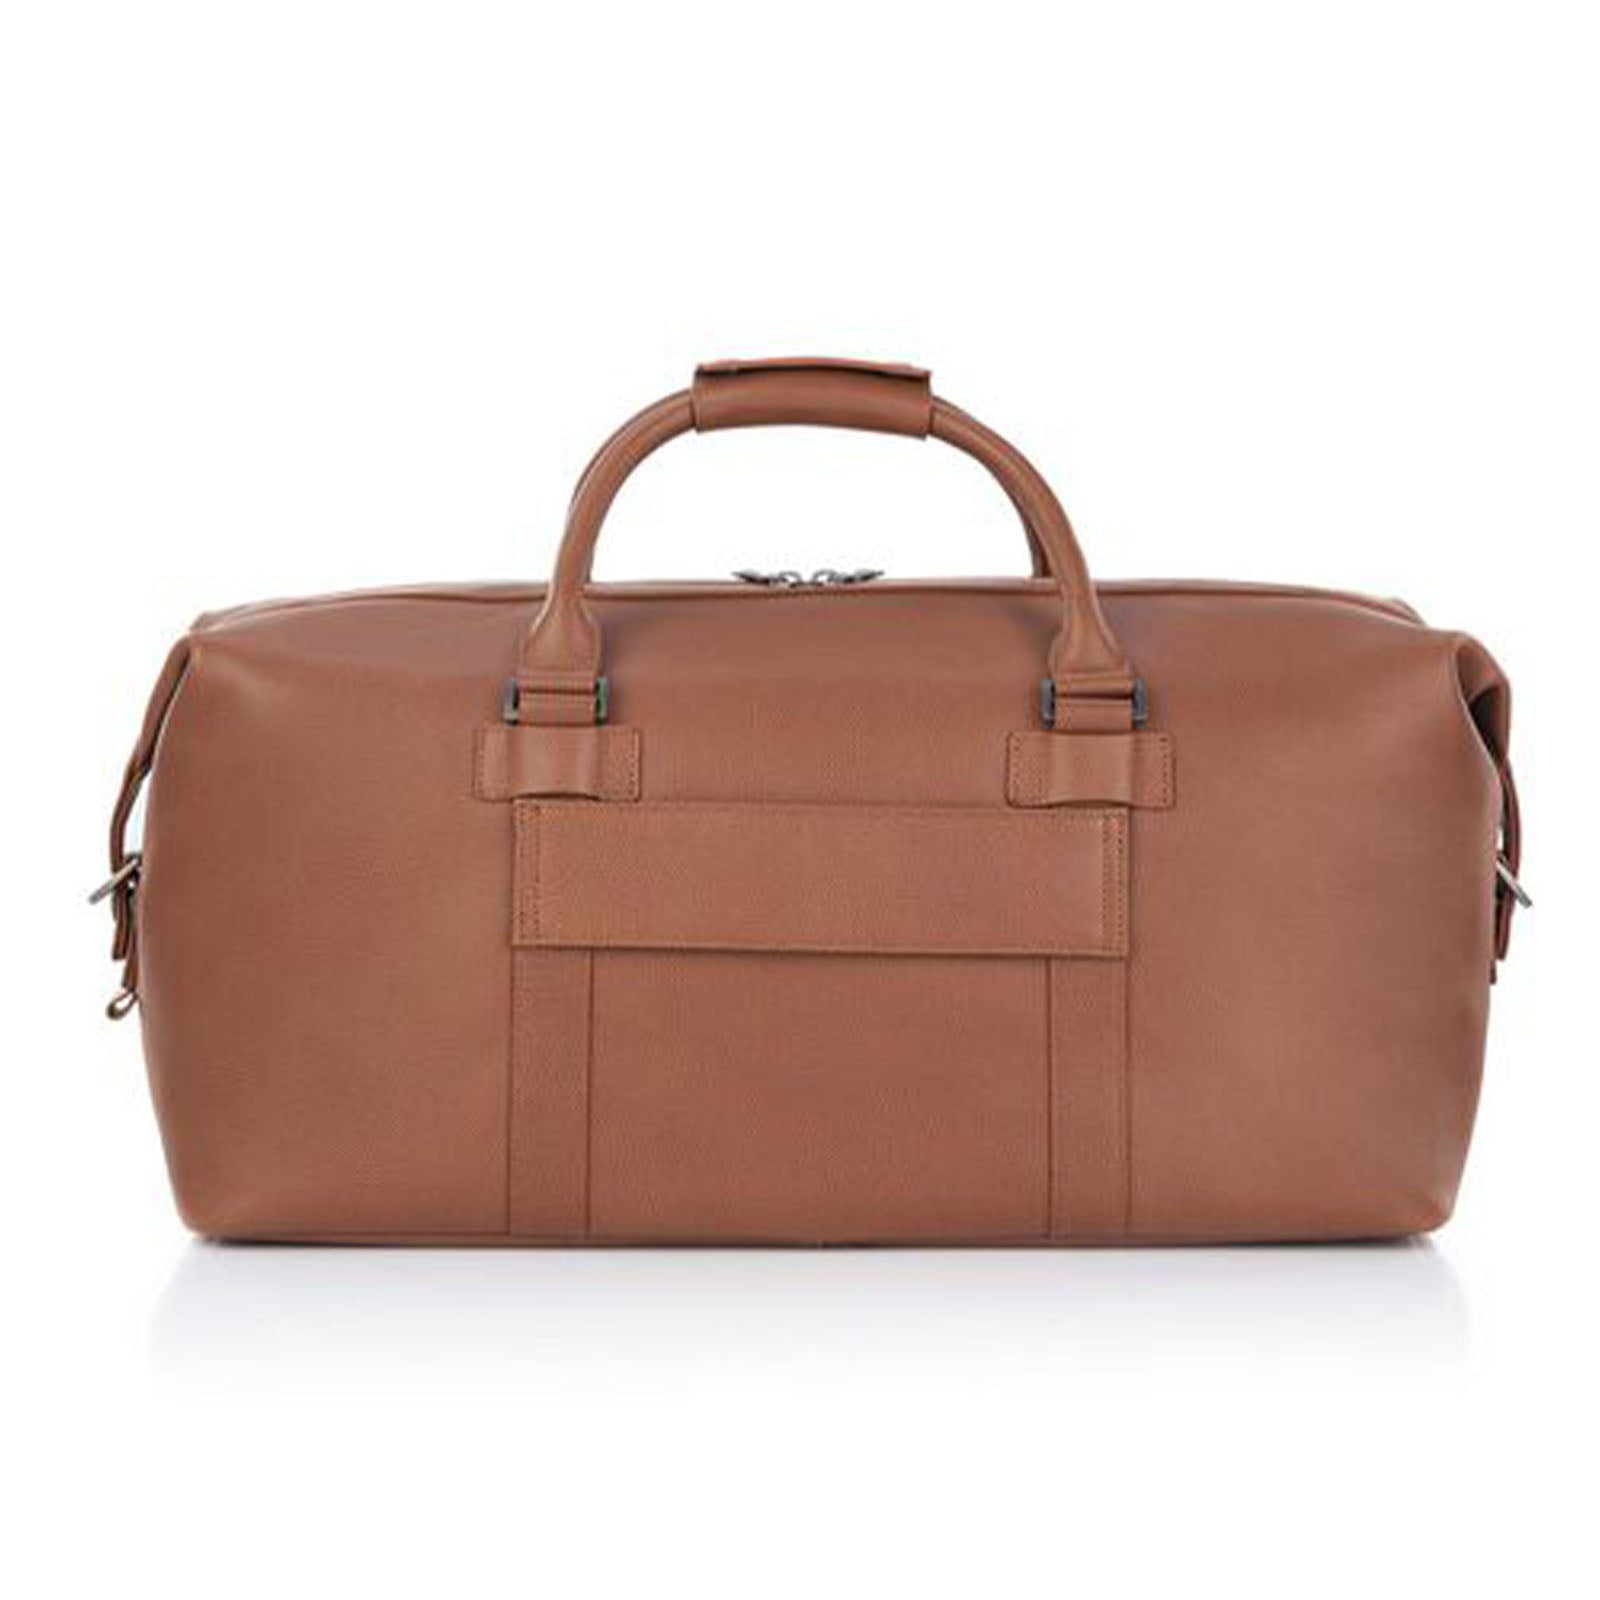 Samsonite-Classic-Leather-Carry-On-Duffle-Cognac-Back